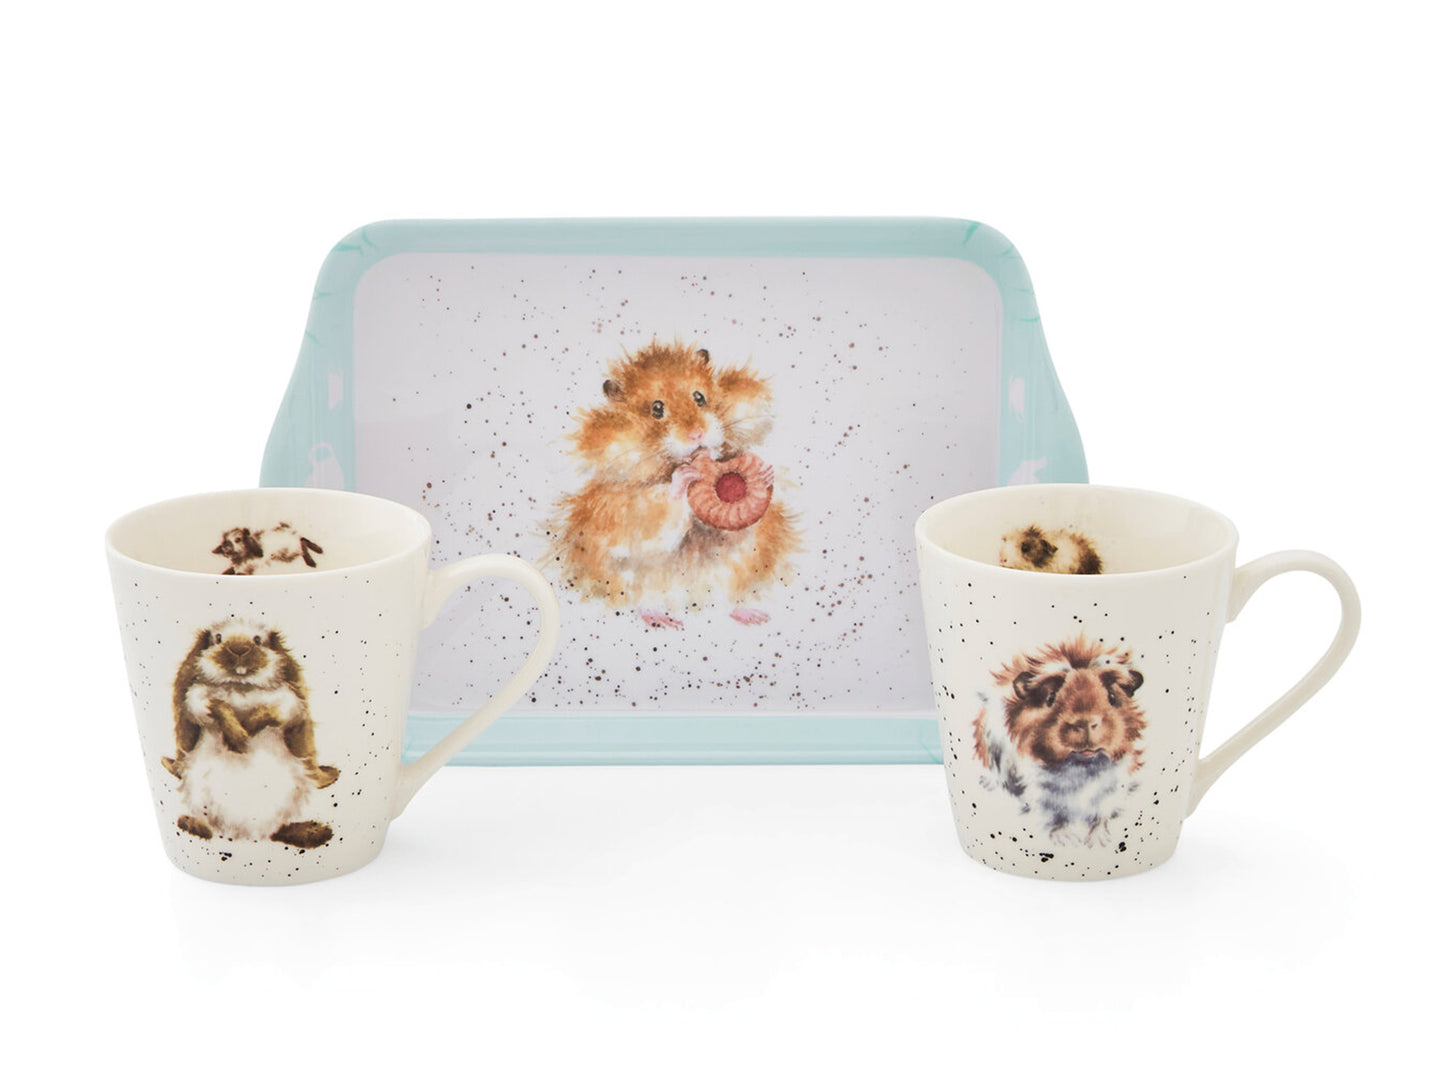 A white melamine tray with a light blue edge and two white mugs, all with different small animal designs on them